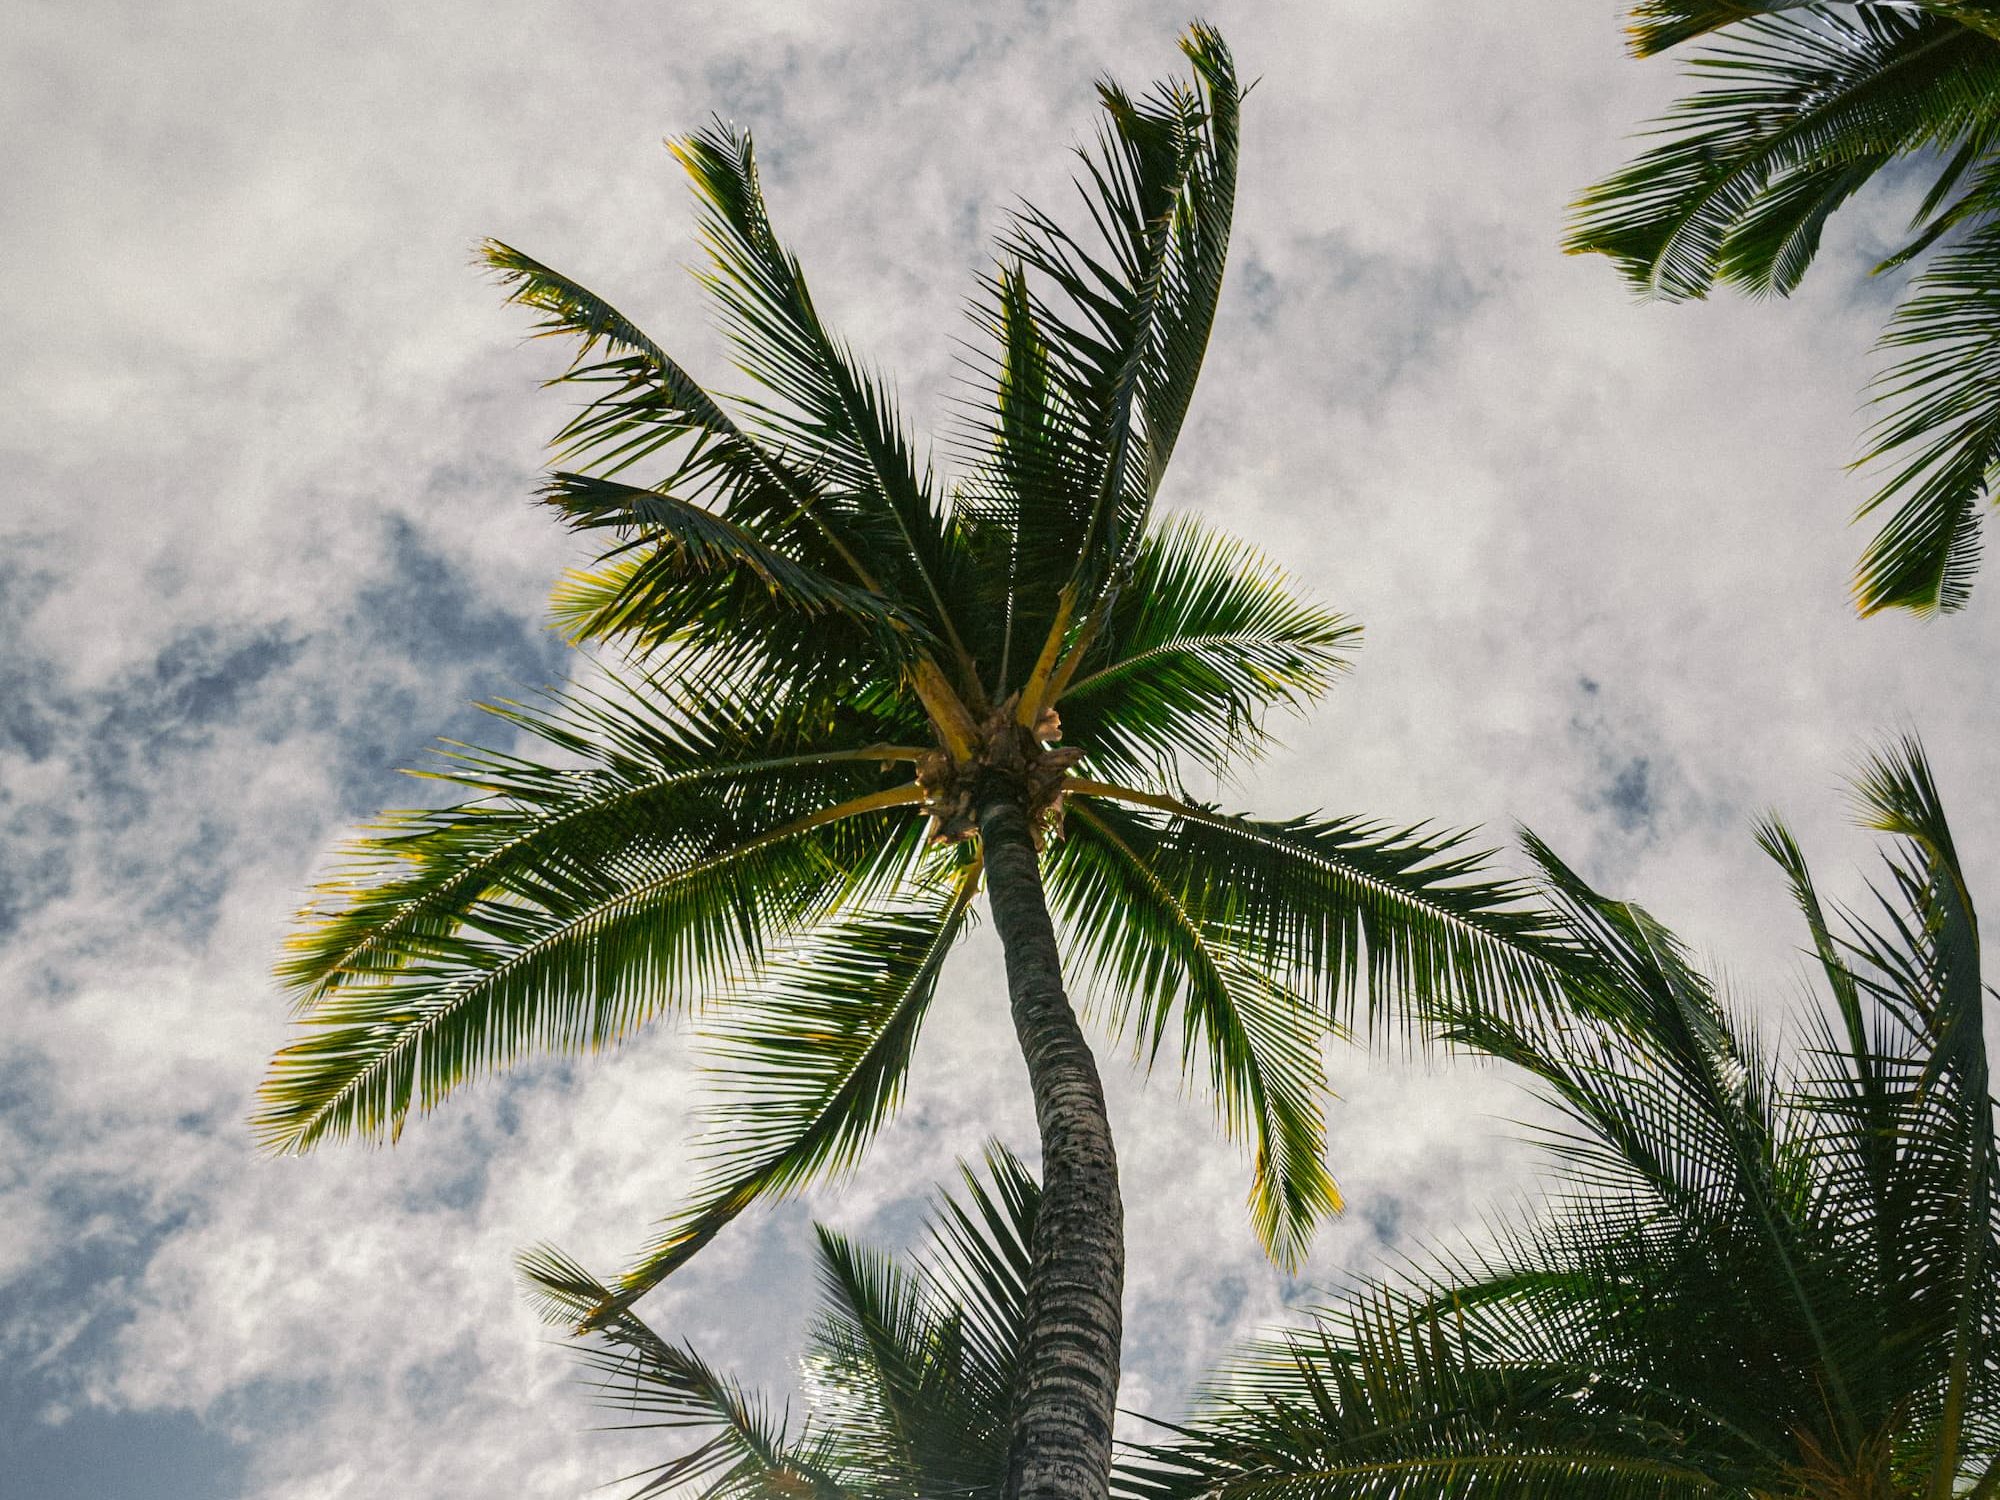 A picture of cocounut palms against the backdrop of a partly cloudy sky